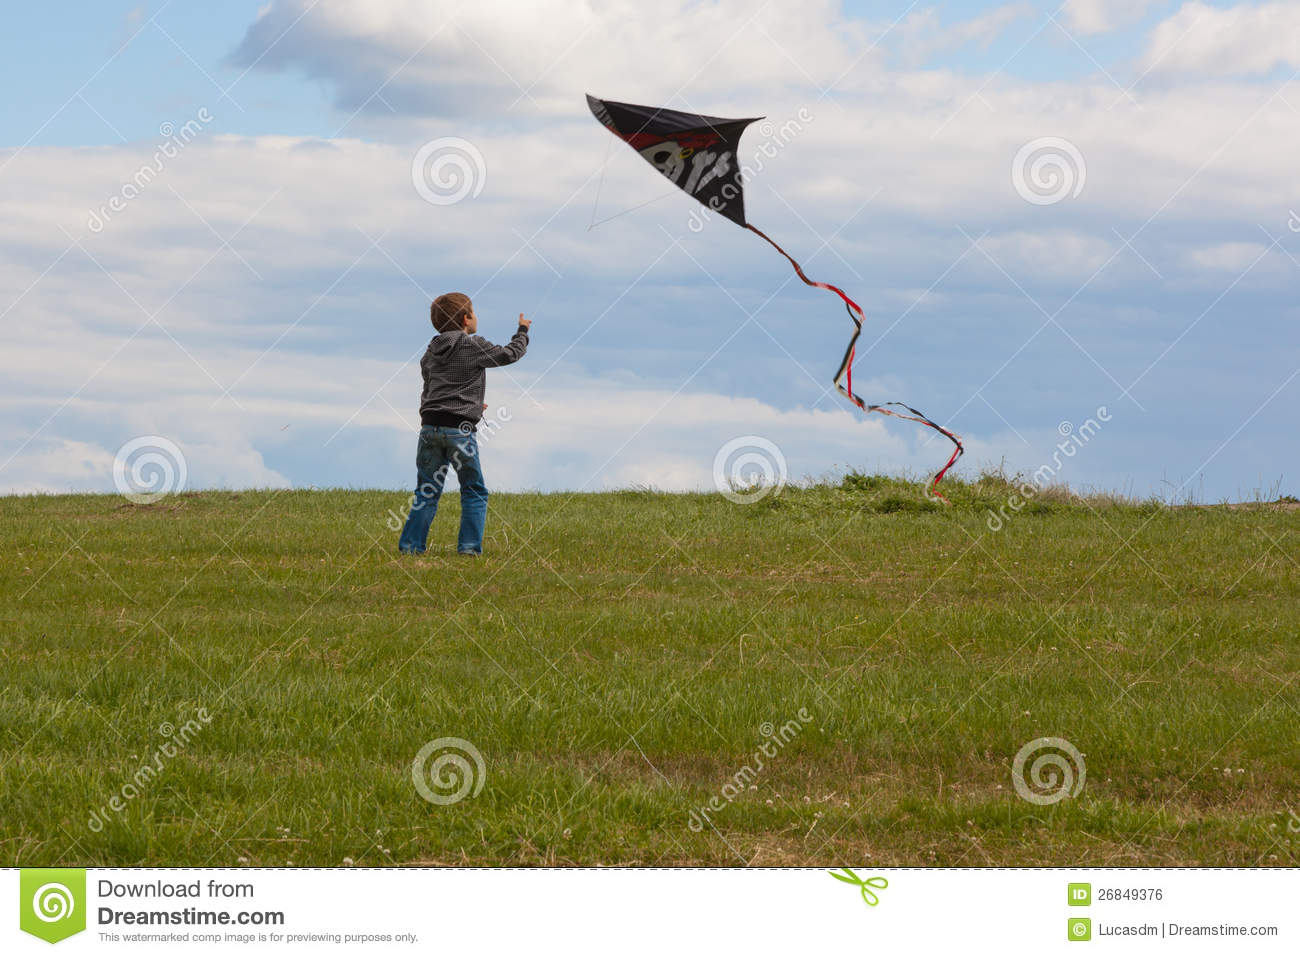 A Boy and His Kite